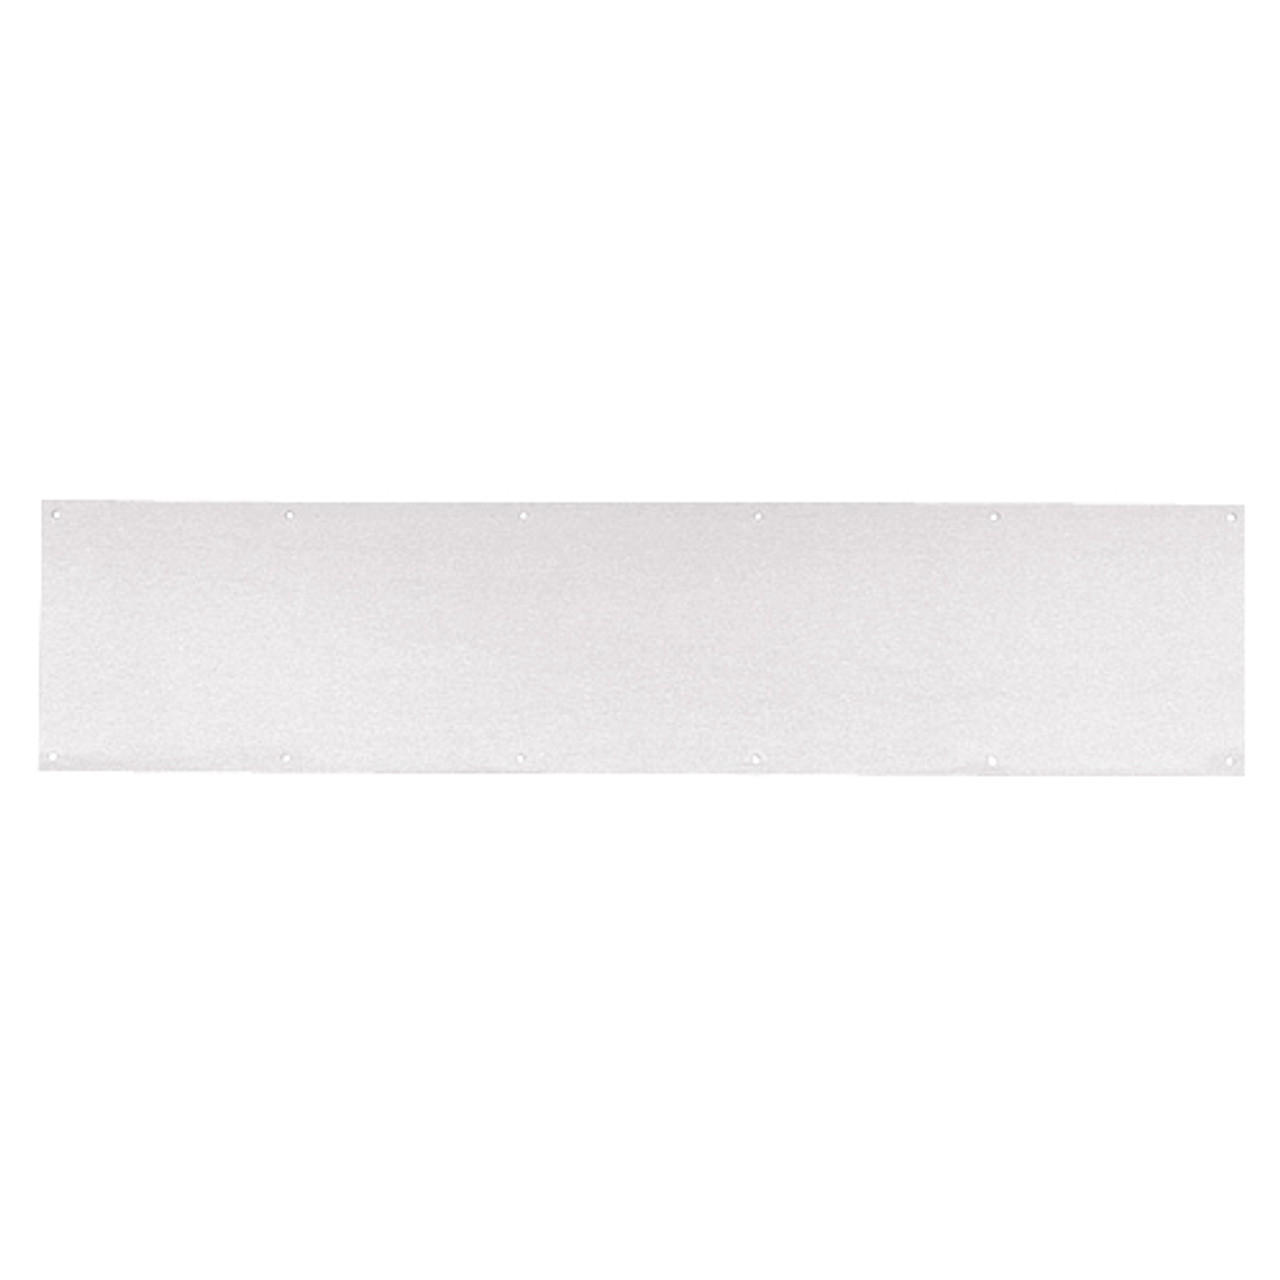 8400-US15-6x42-B-CS Ives 8400 Series Protection Plate in Satin Nickel